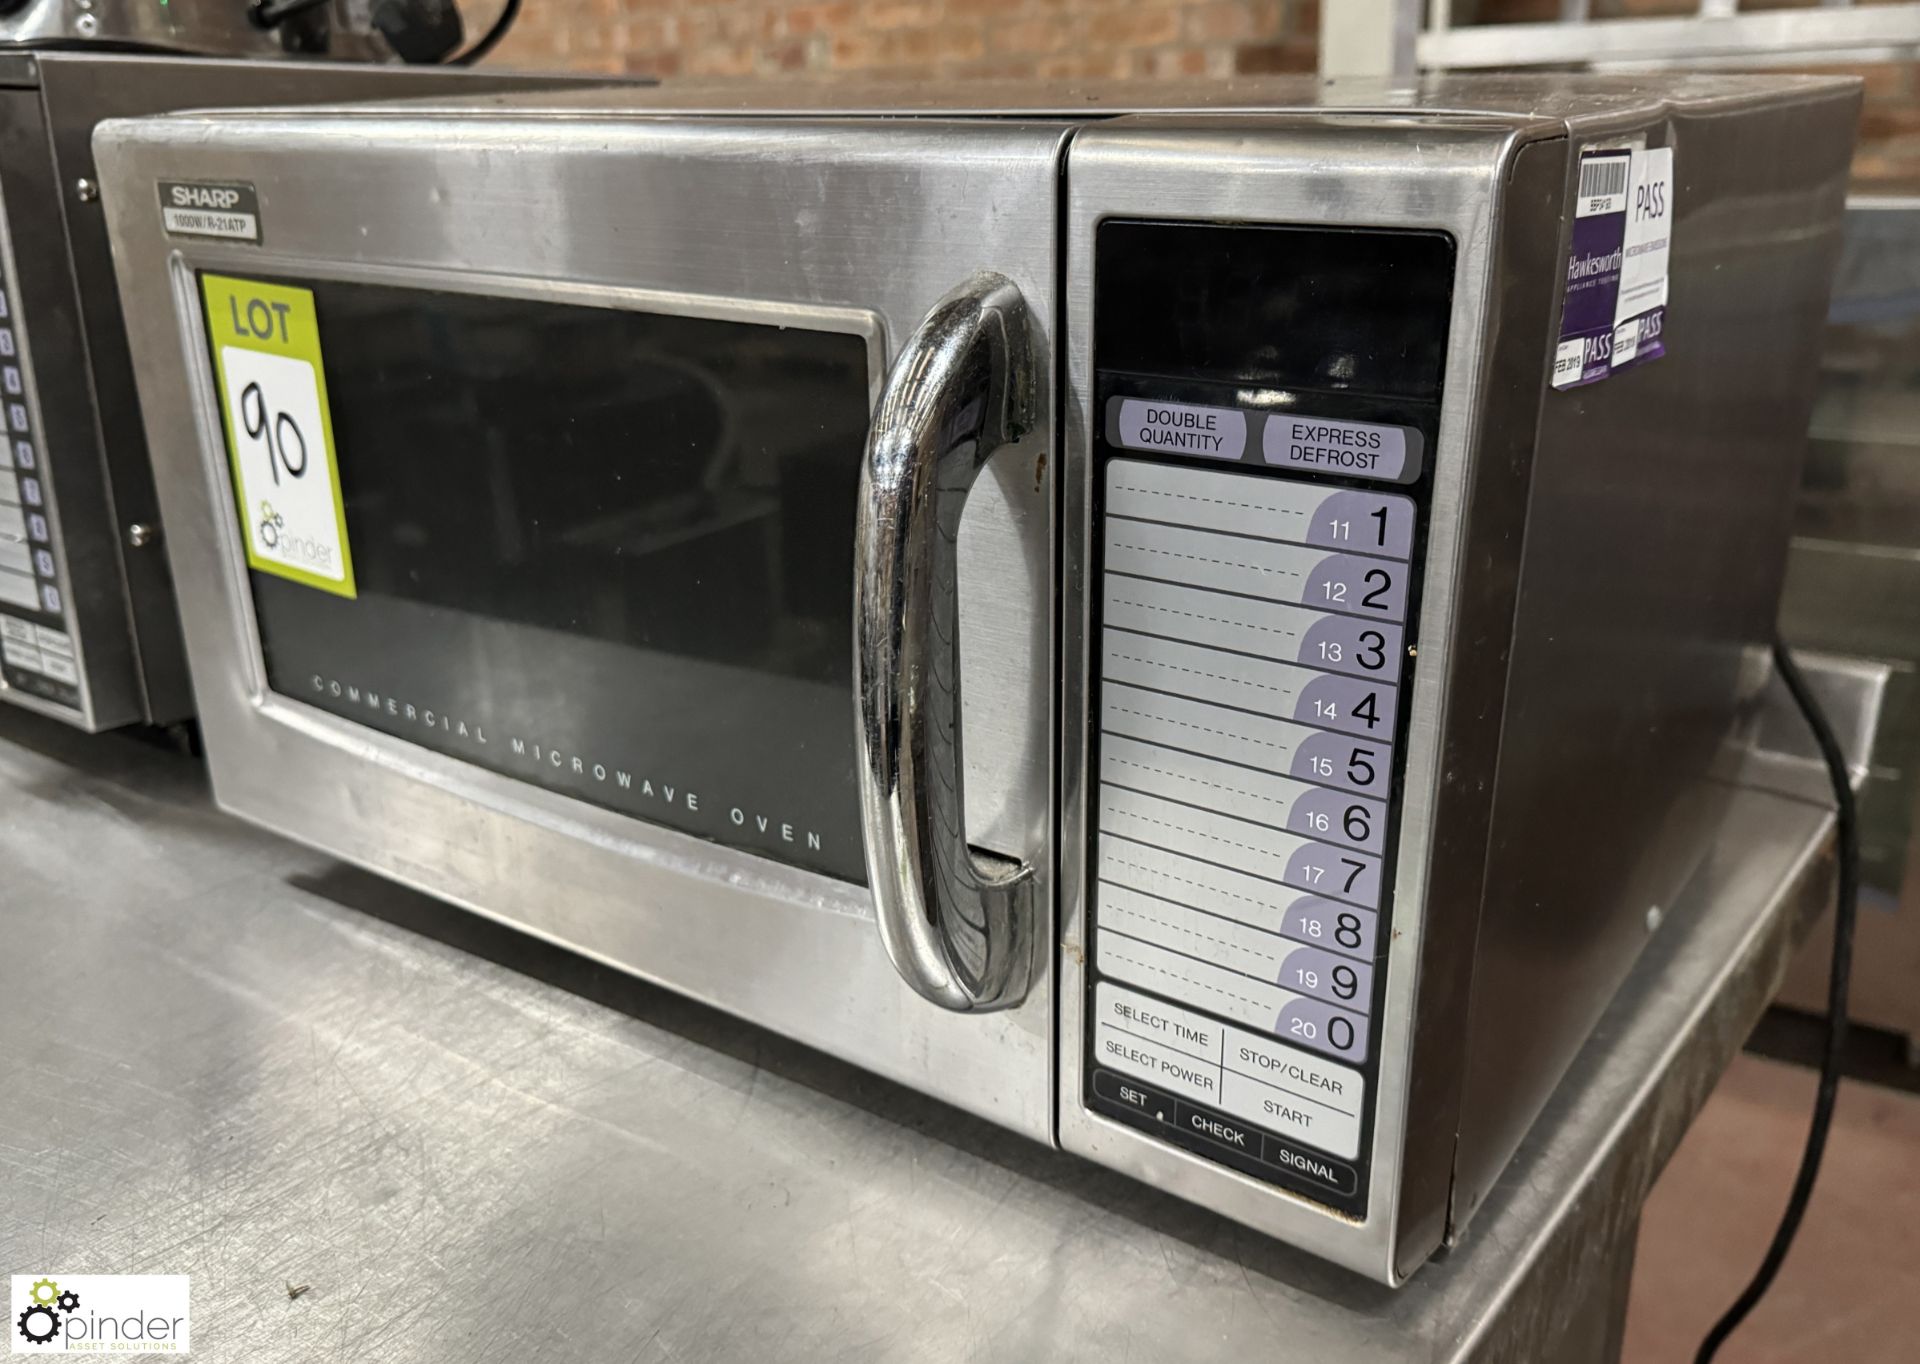 Sharp R-21ATP stainless steel Commercial Microwave Oven, 240volts - Image 2 of 4